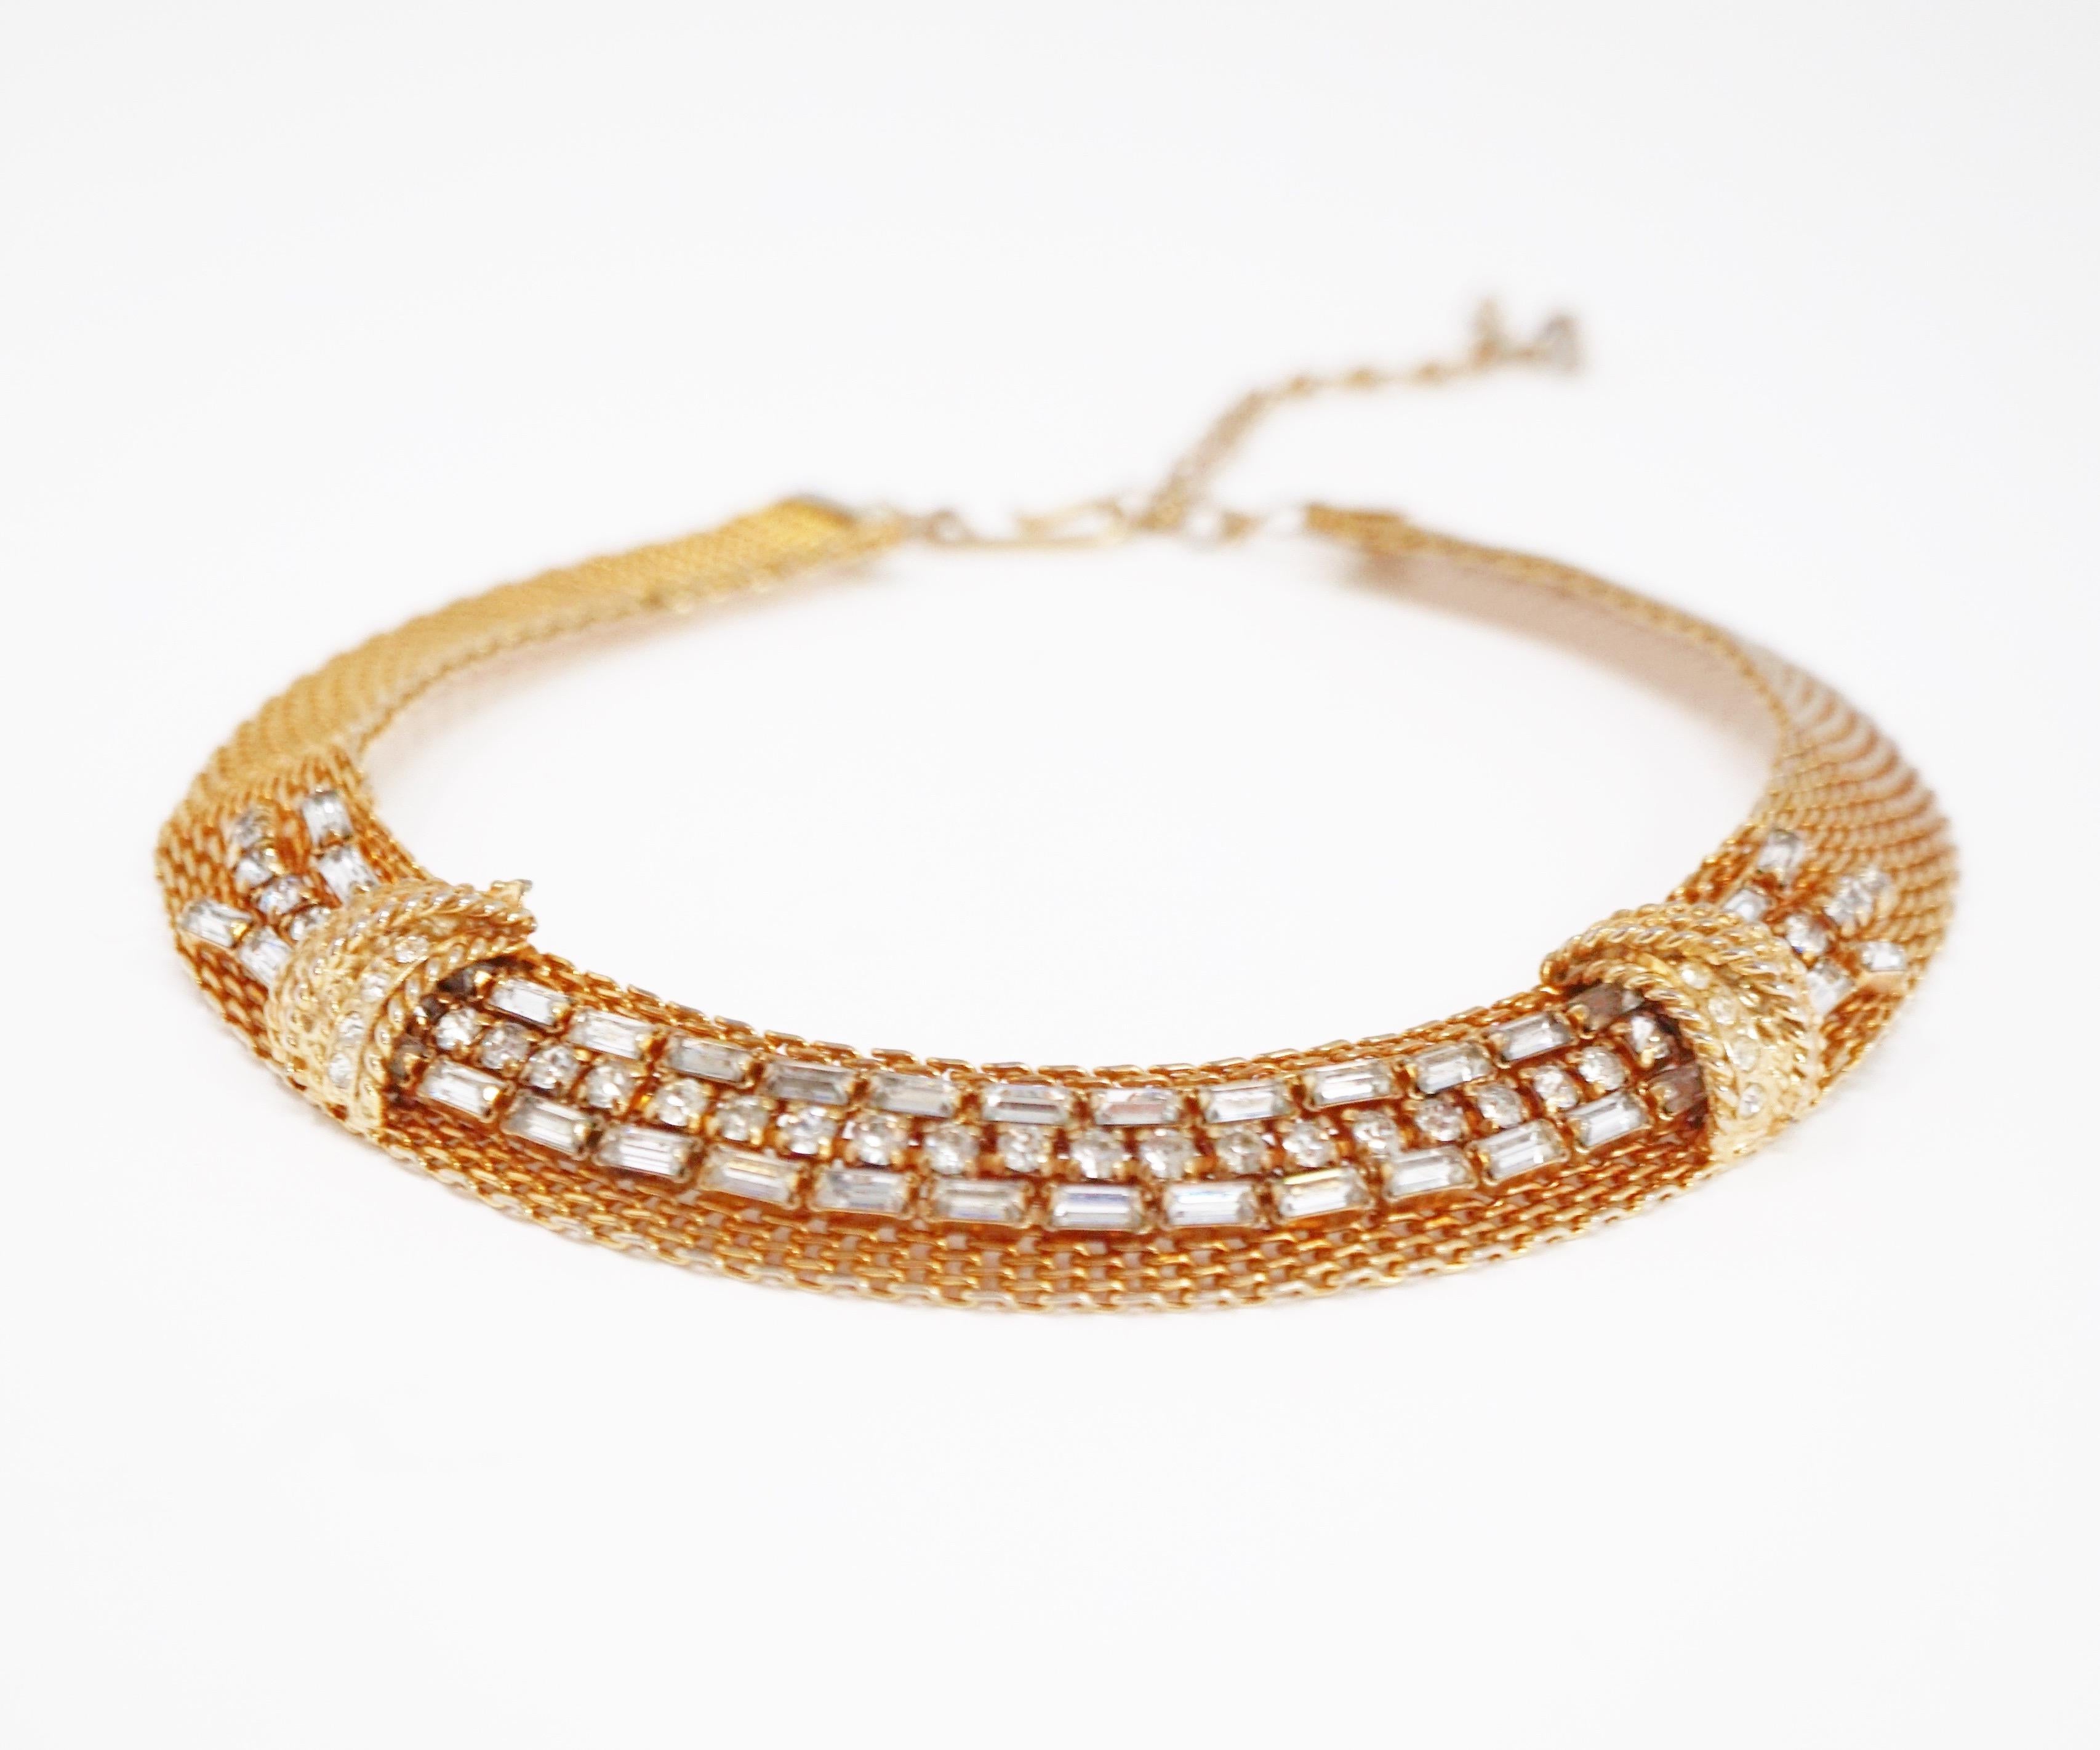 This gorgeous circa 1950s Jewels by Julio mesh choker necklace with rhinestone baguette accents is an extremely collectible piece of design history, with the 